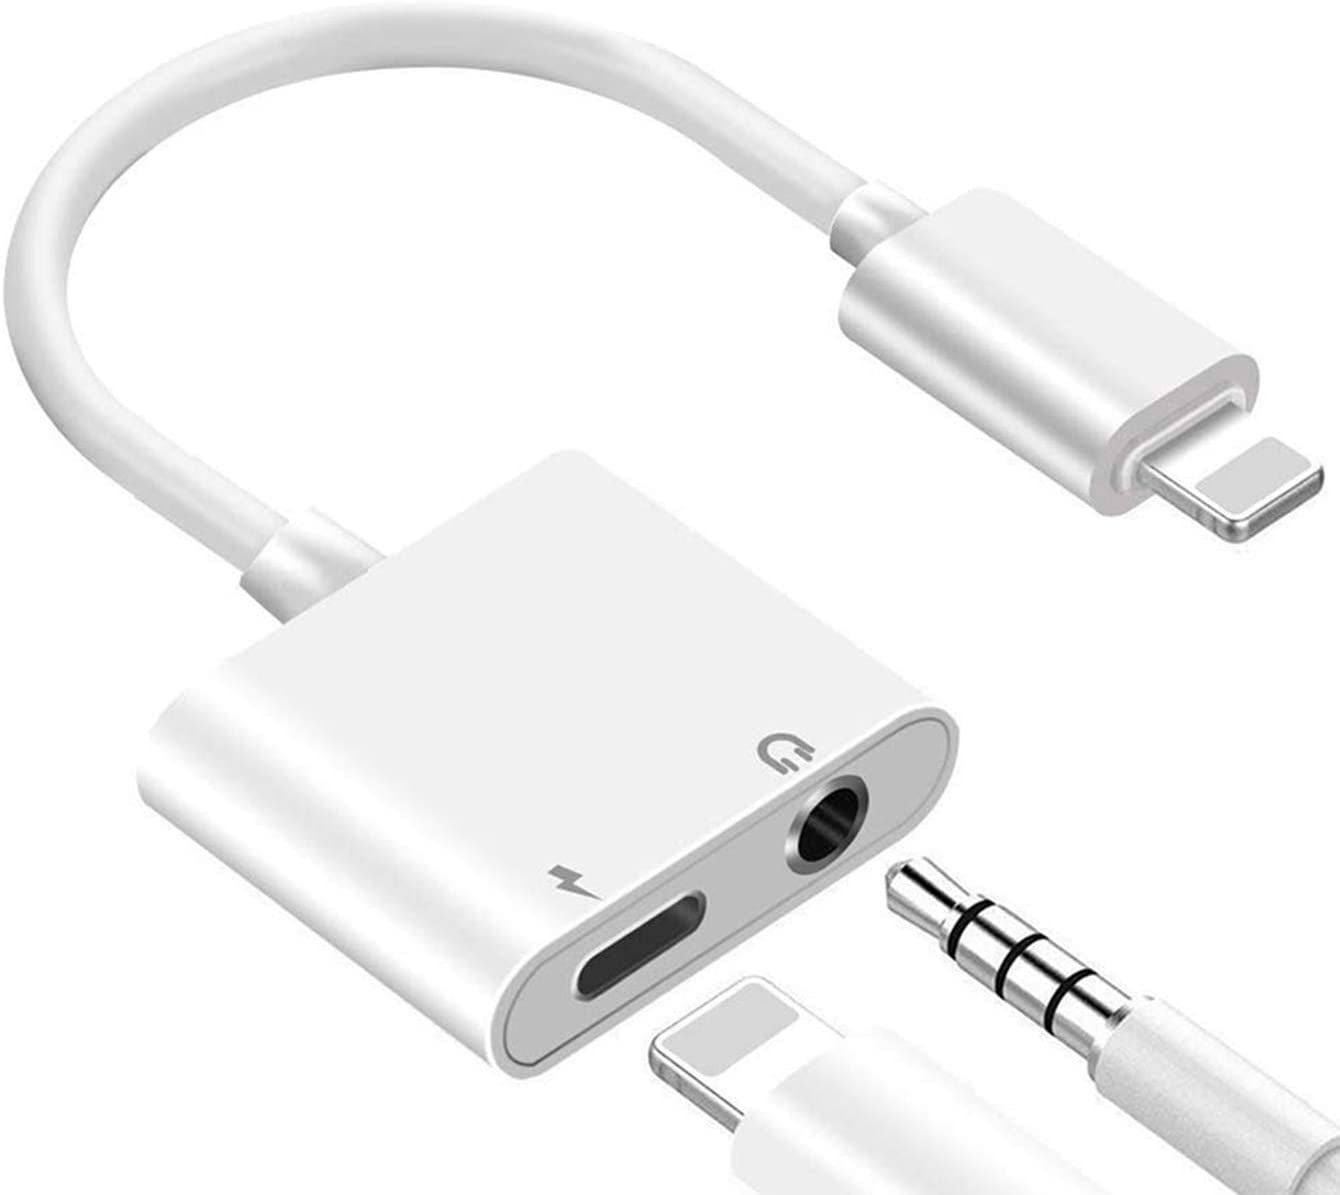 Headphone Adapter for iPhone 7 Adaptor to 3.5mm Converter Earphone for iPhone X/Xs/XS max/8/8 Plus 7/7 Plus Headphone Cable Splitter Audio Jack Headphone Cable Earbud Adapter Support iOS 12 or Later